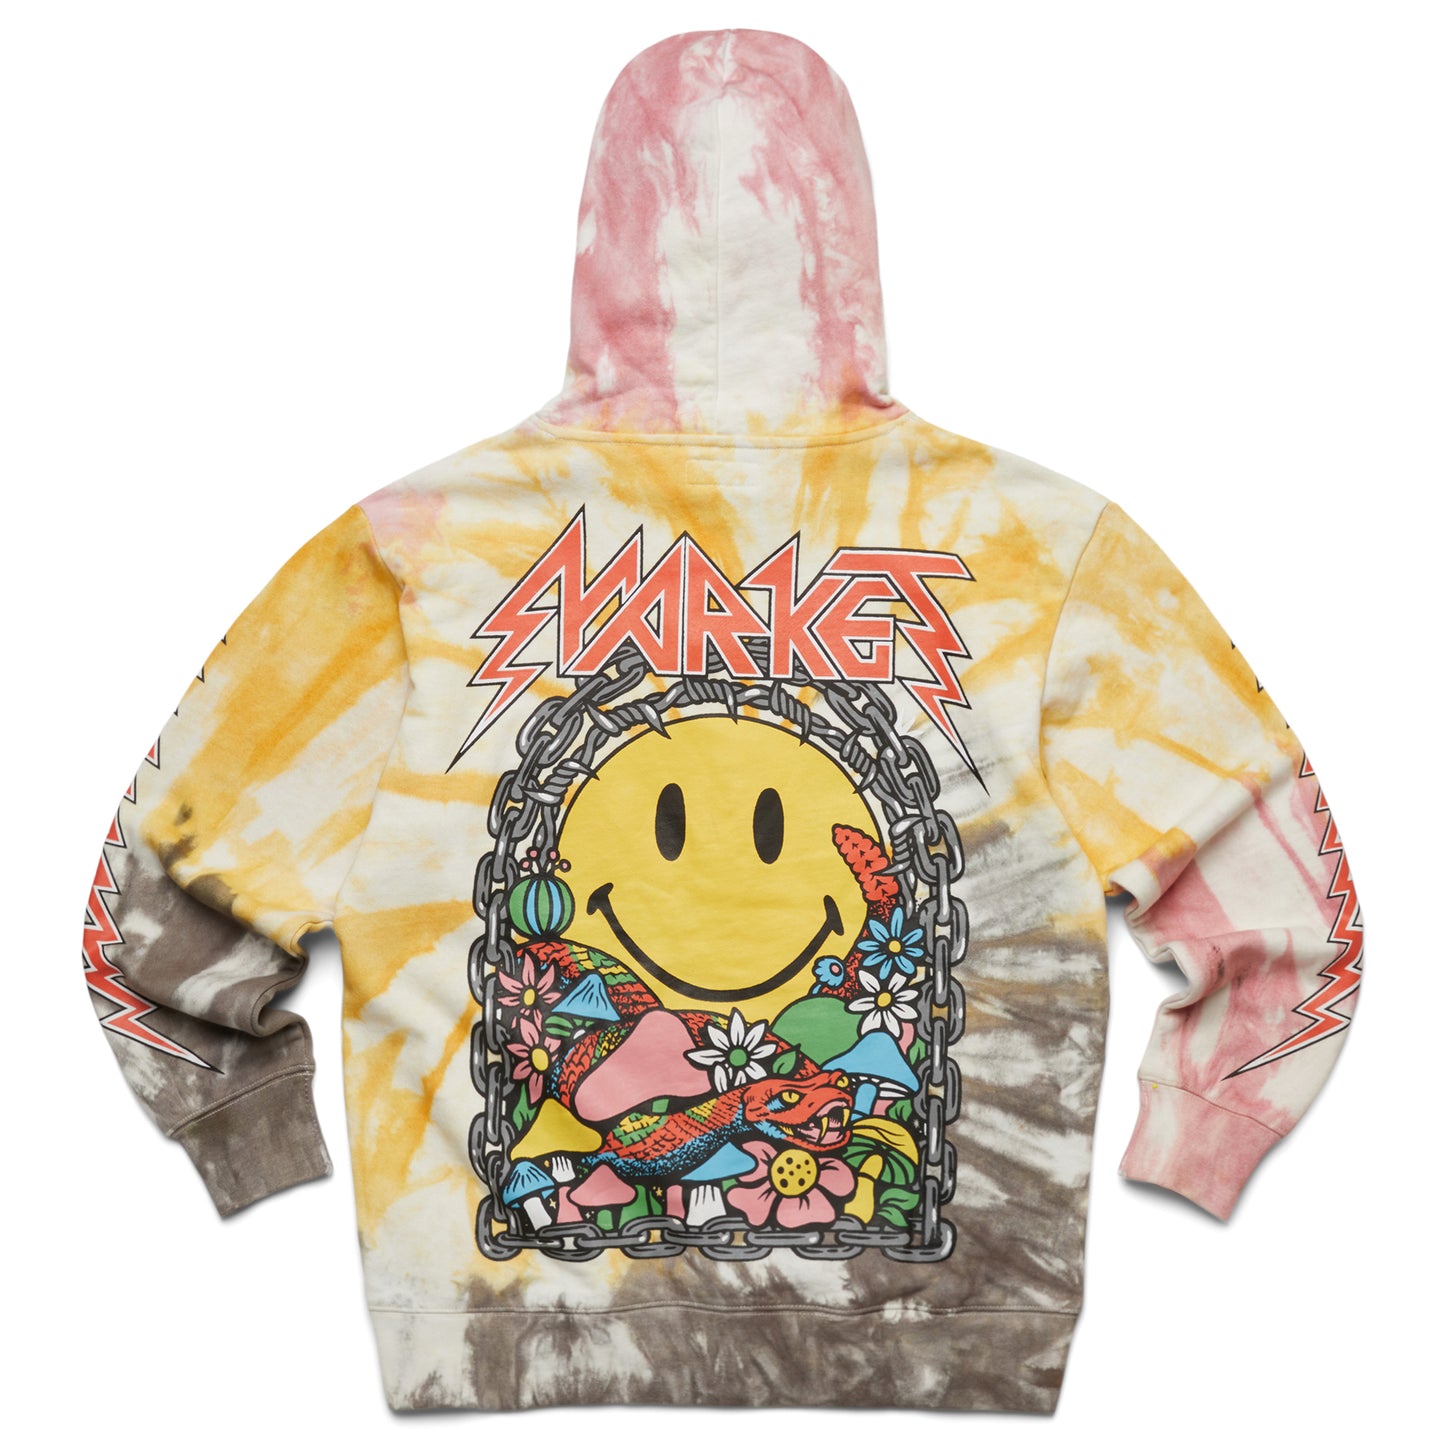 MARKET clothing brand SMILEY IRON MARKET TIE-DYE HOODIE. Find more graphic tees, hats and more at MarketStudios.com. Formally Chinatown Market.